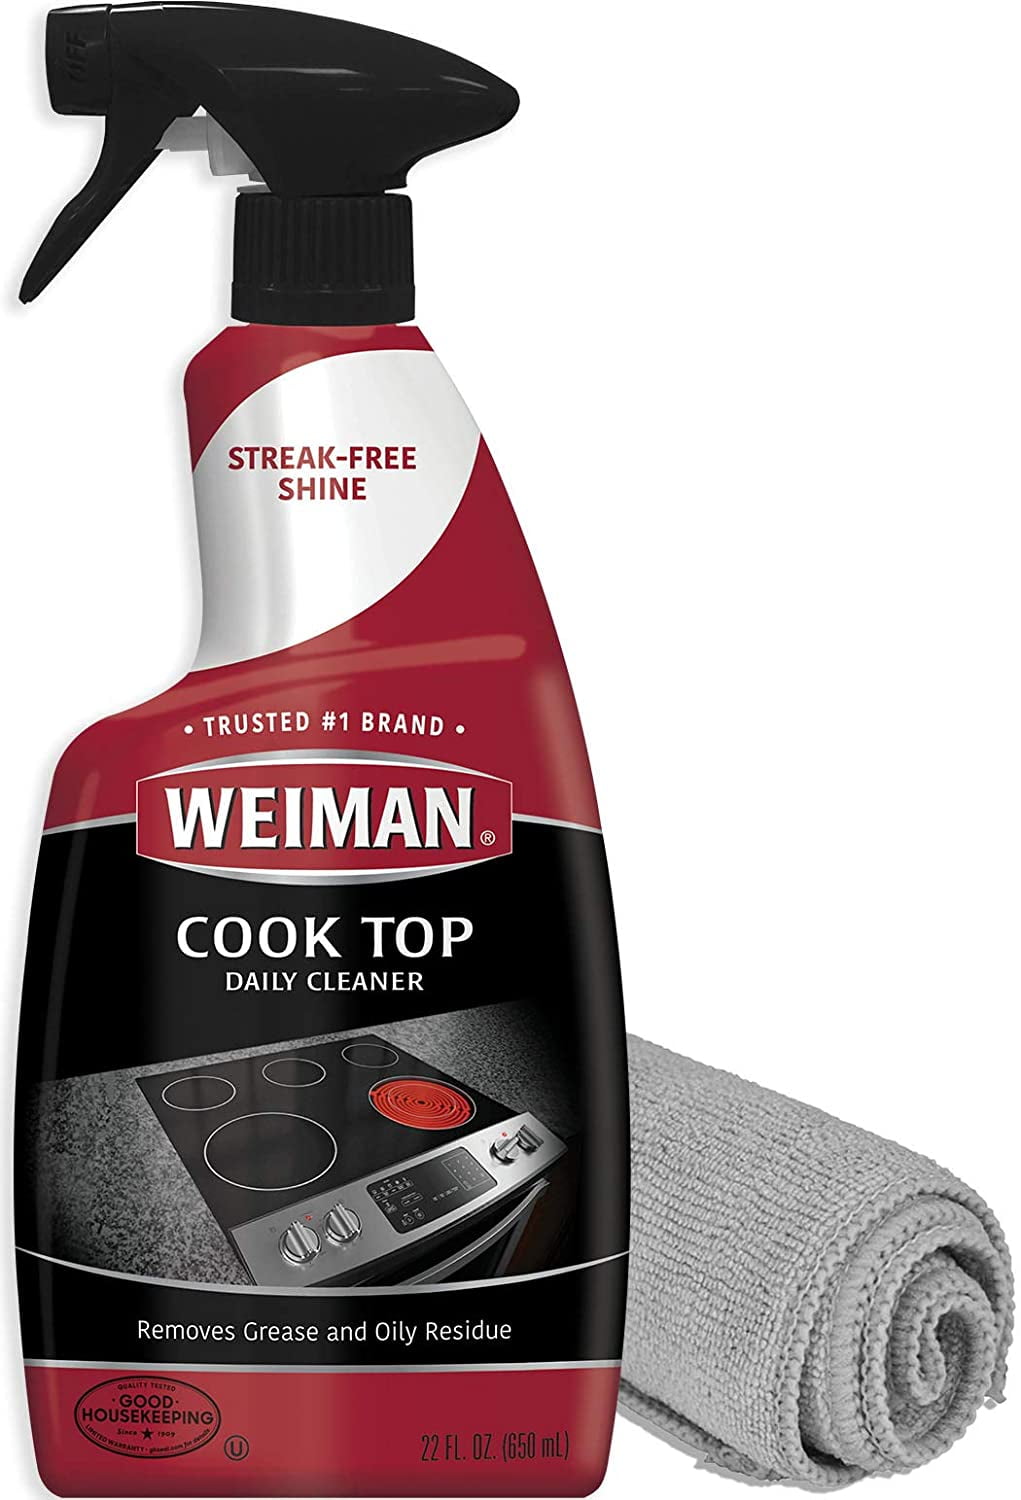 Rutland 8 fl. oz. Stove, Grill and Hearth Glass Cleaner 84 - The Home Depot